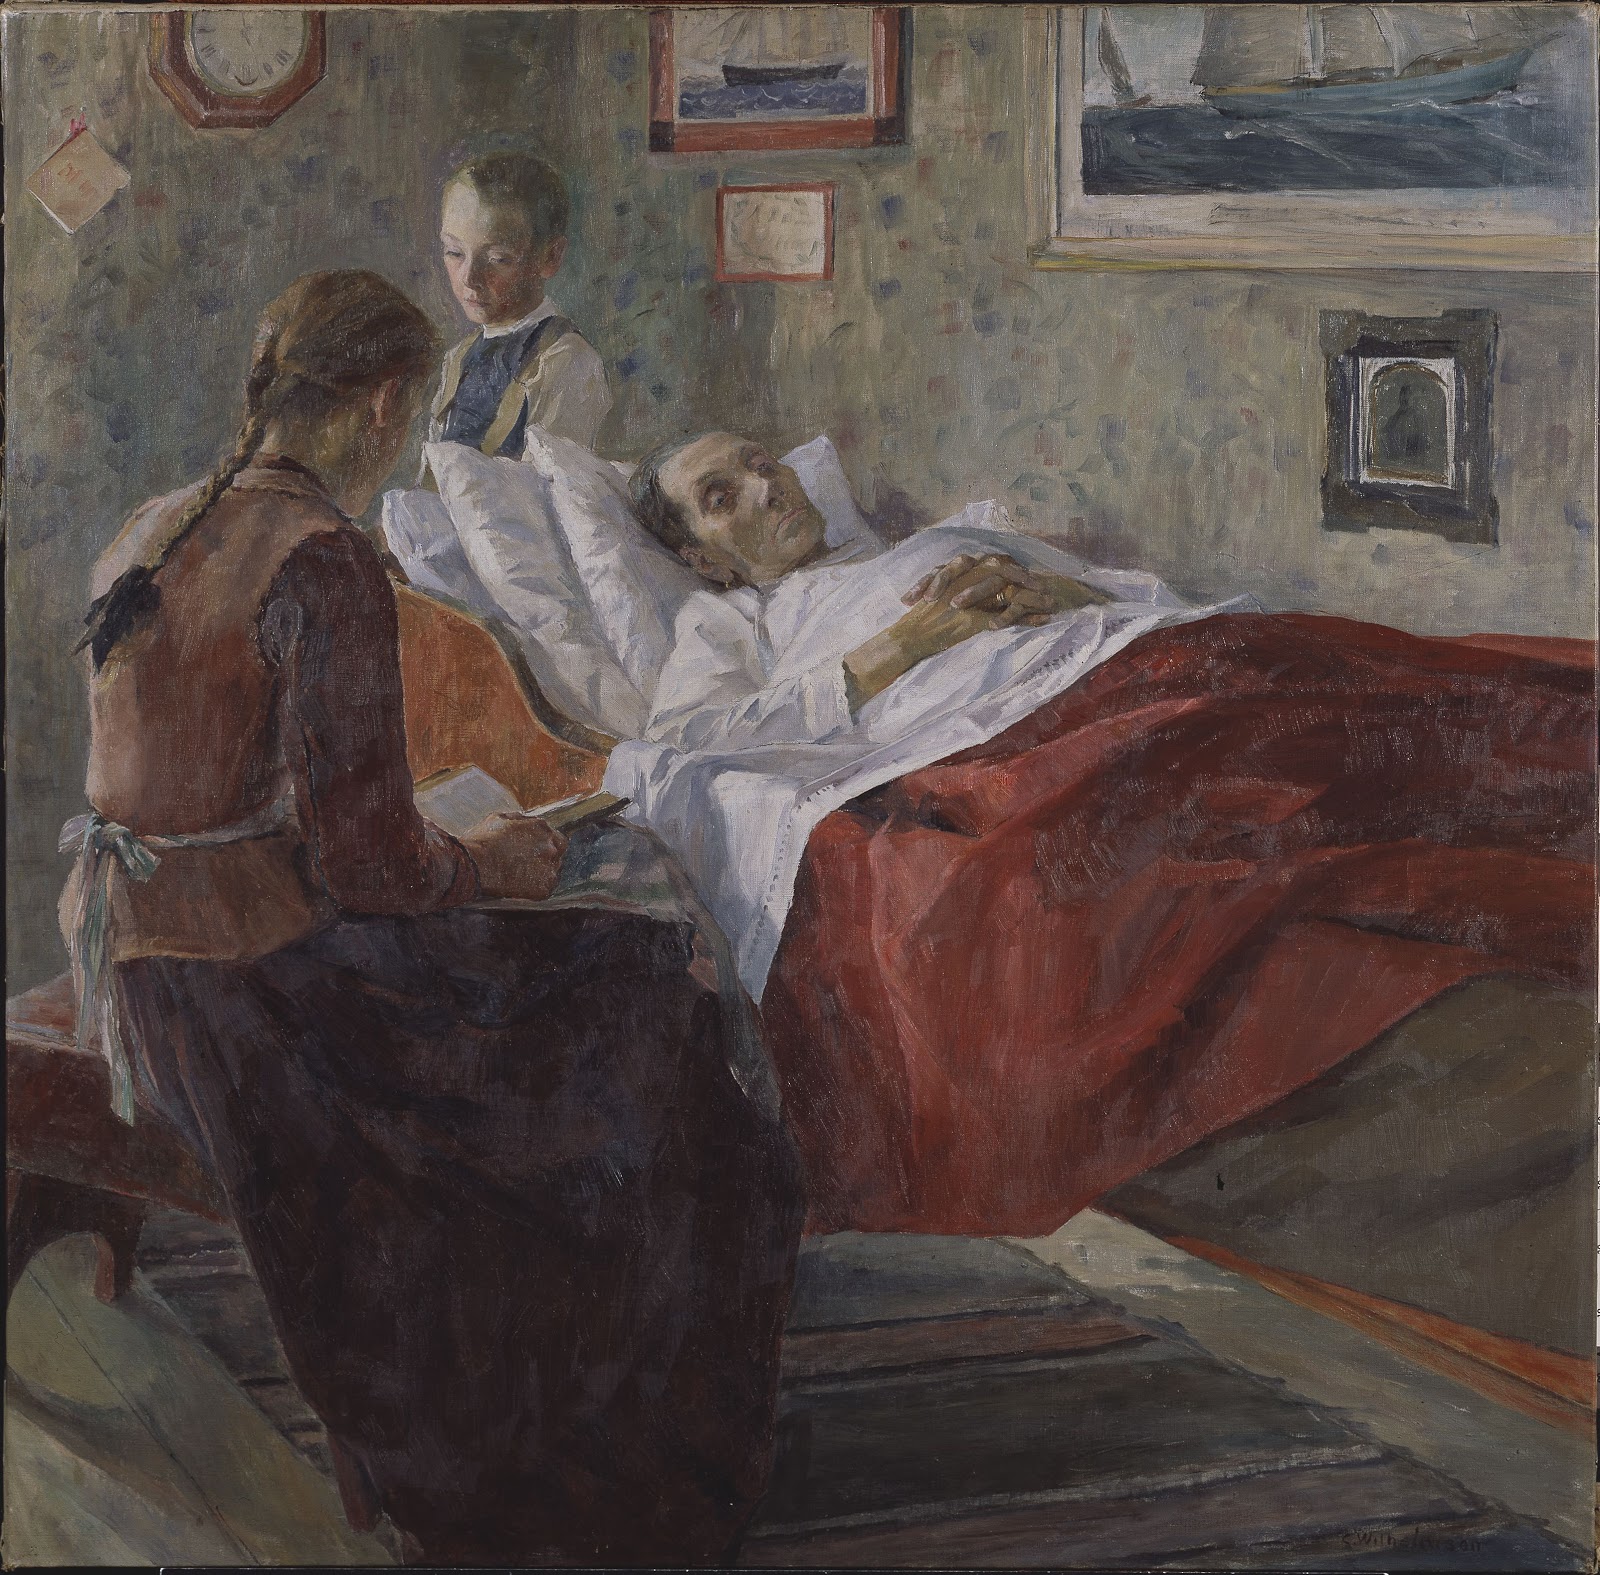 Carl Wilhelmson, Thorsten Laurin, 1875-1954, painting, 1925, Oil on canvas,  Height, 85 cm (33.4 inches), Width, 75.5 cm (29.7 inches), Inscriptions,  Signed, C. Wilhelmson, Ekarne, 1925., down right, Reimagined by Gibon,  design